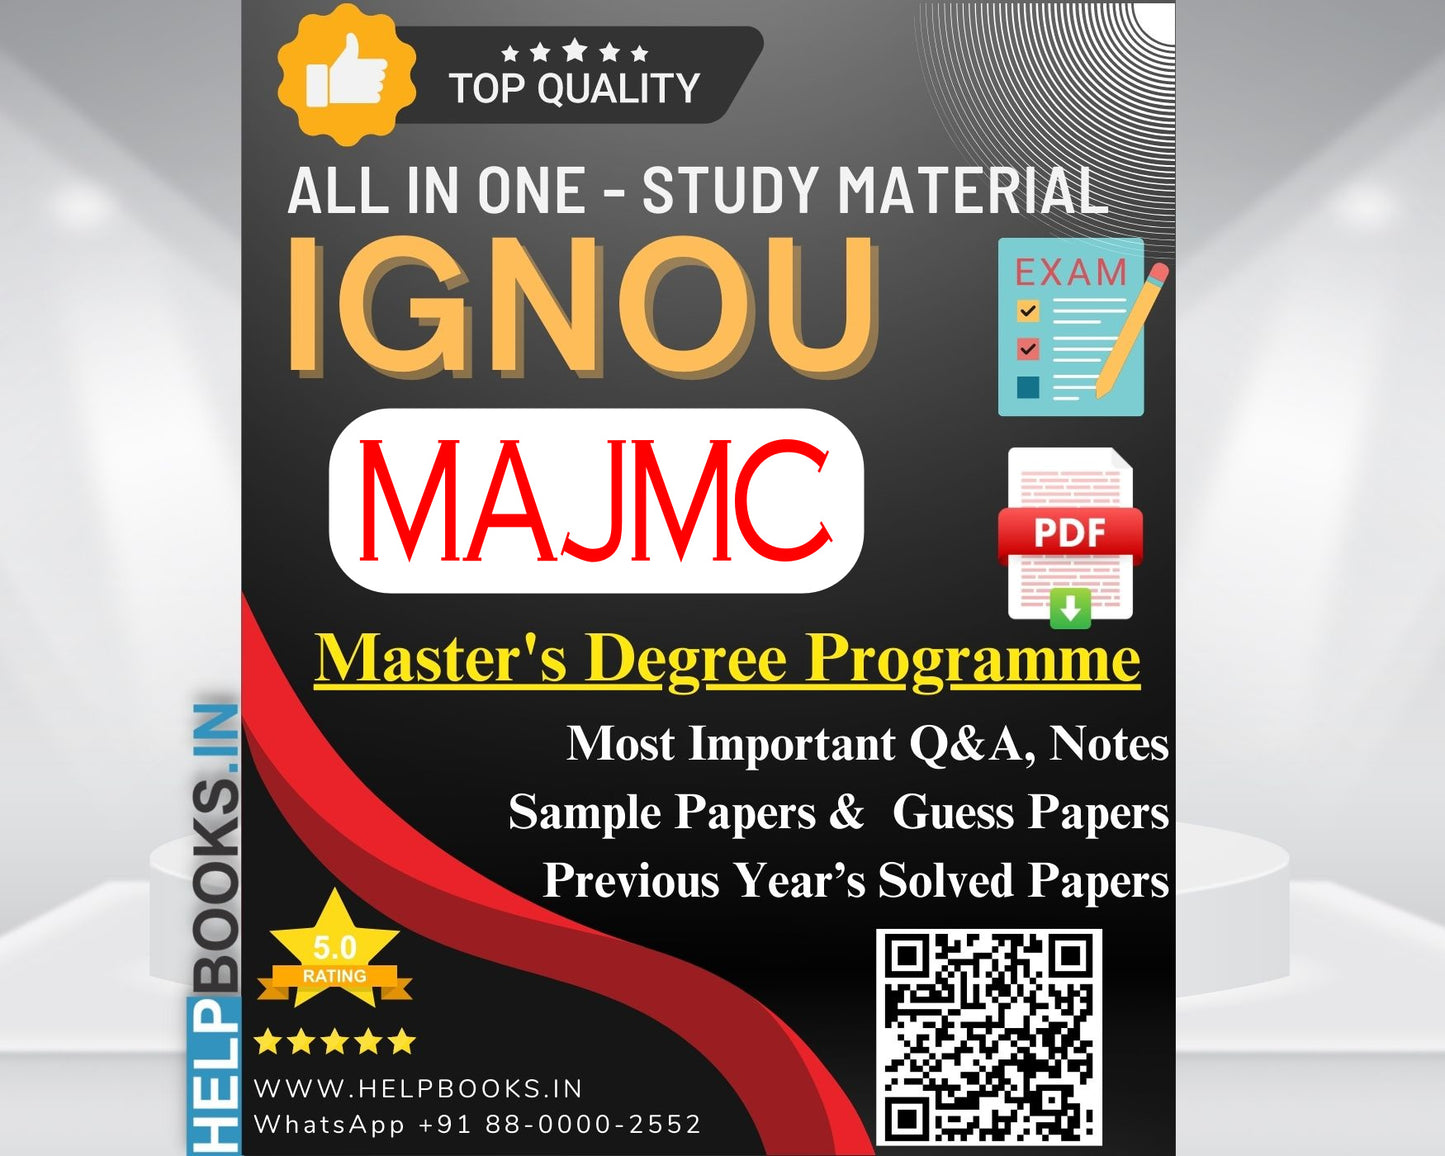 MAJMC IGNOU Exam Combo of 10 Solved Papers: 5 Previous Years' Solved Papers & 5 Sample Guess Papers for Master of Arts Journalism and Mass Communication